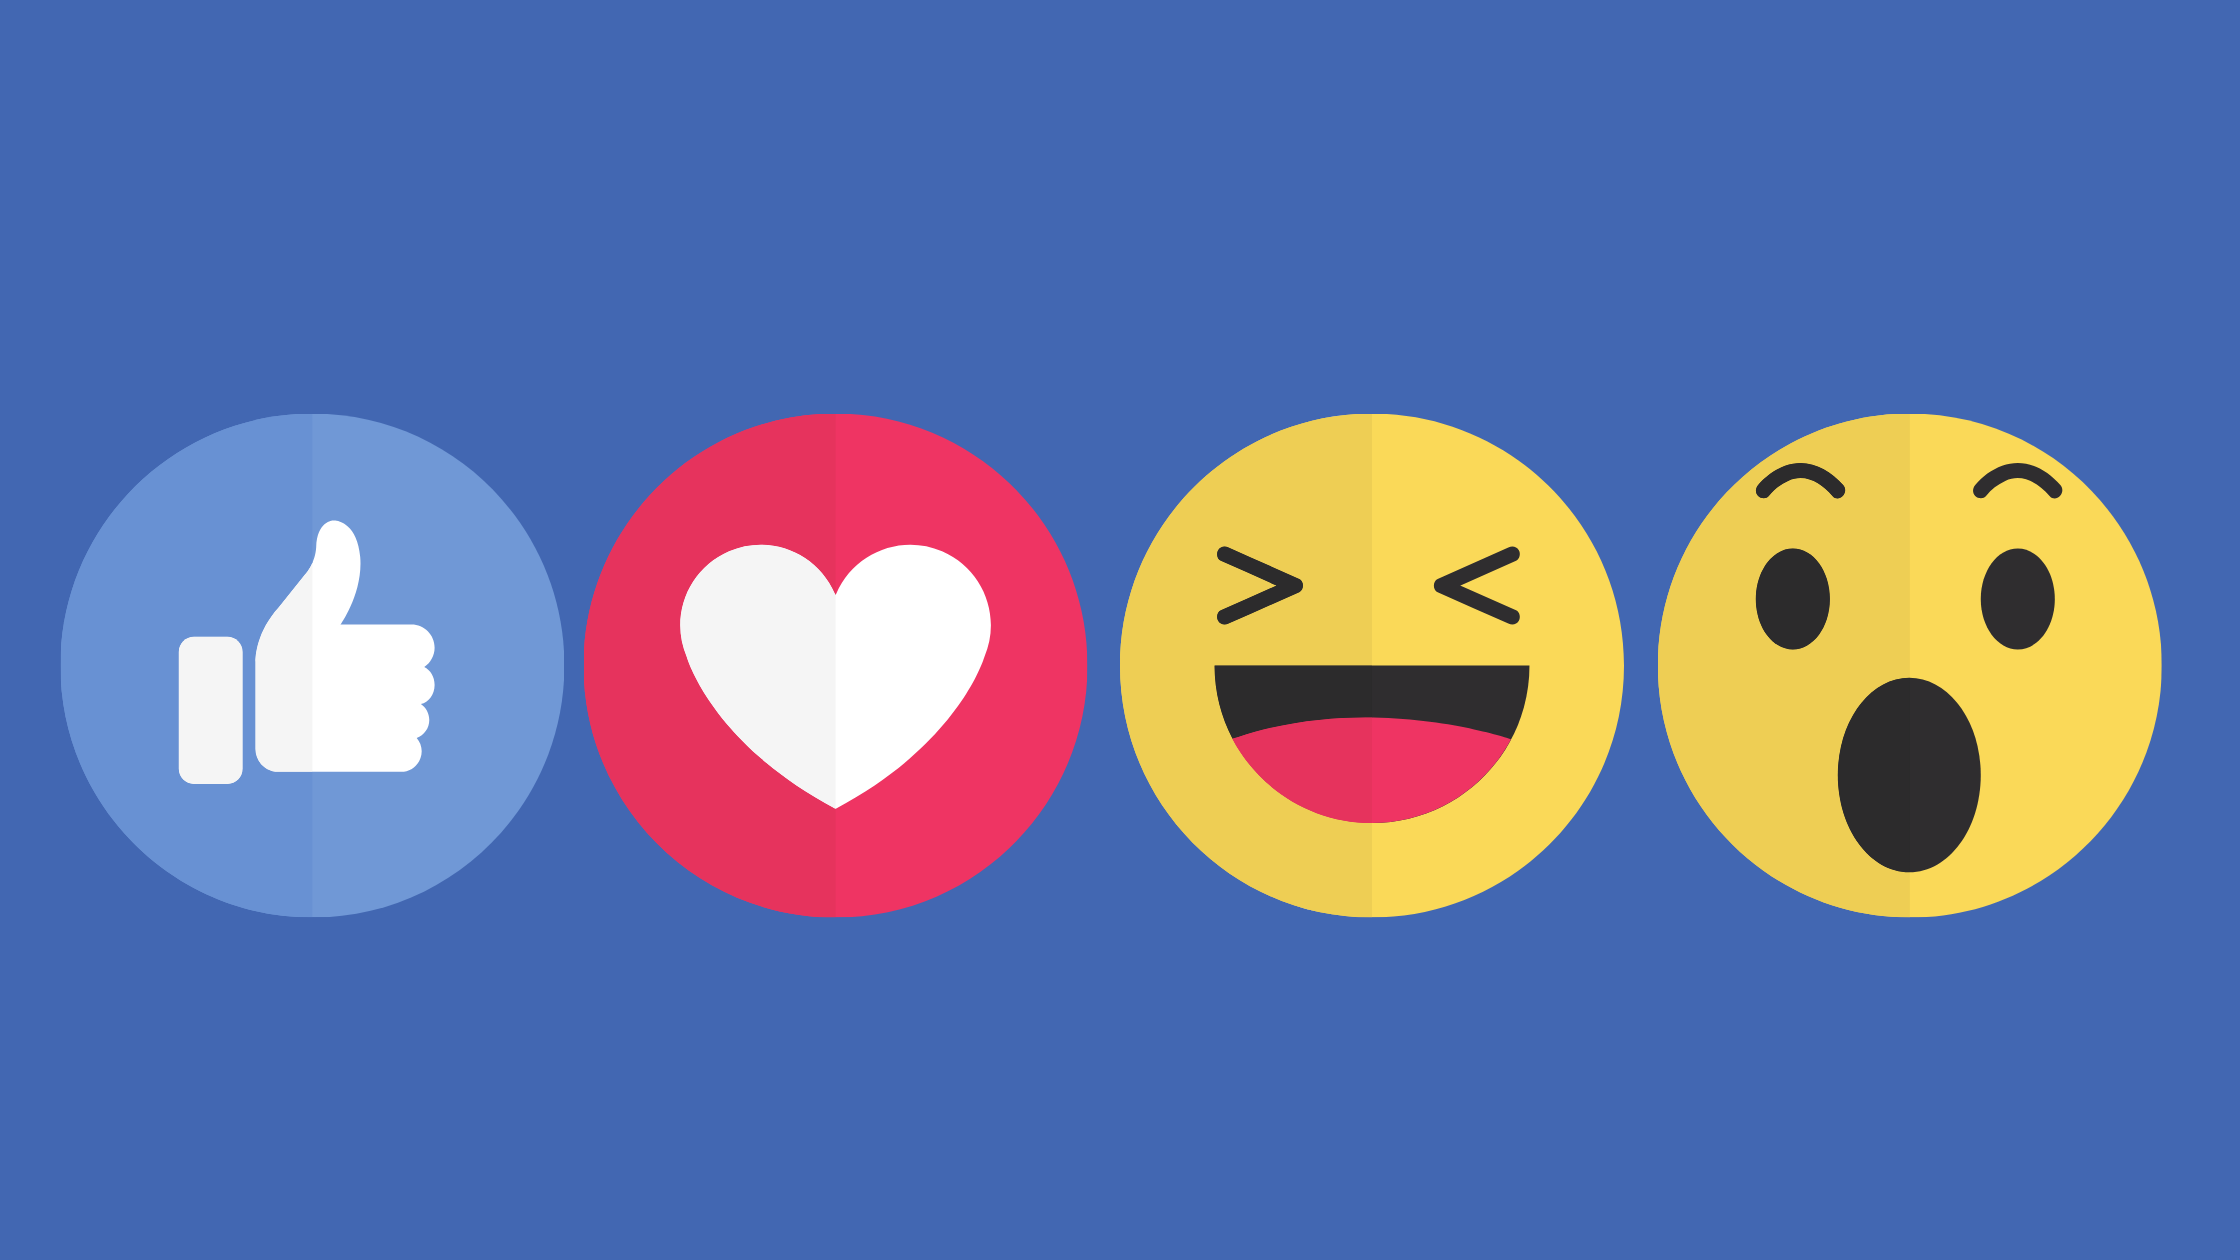 The like, heart, laugh, and wow Facebook reactions